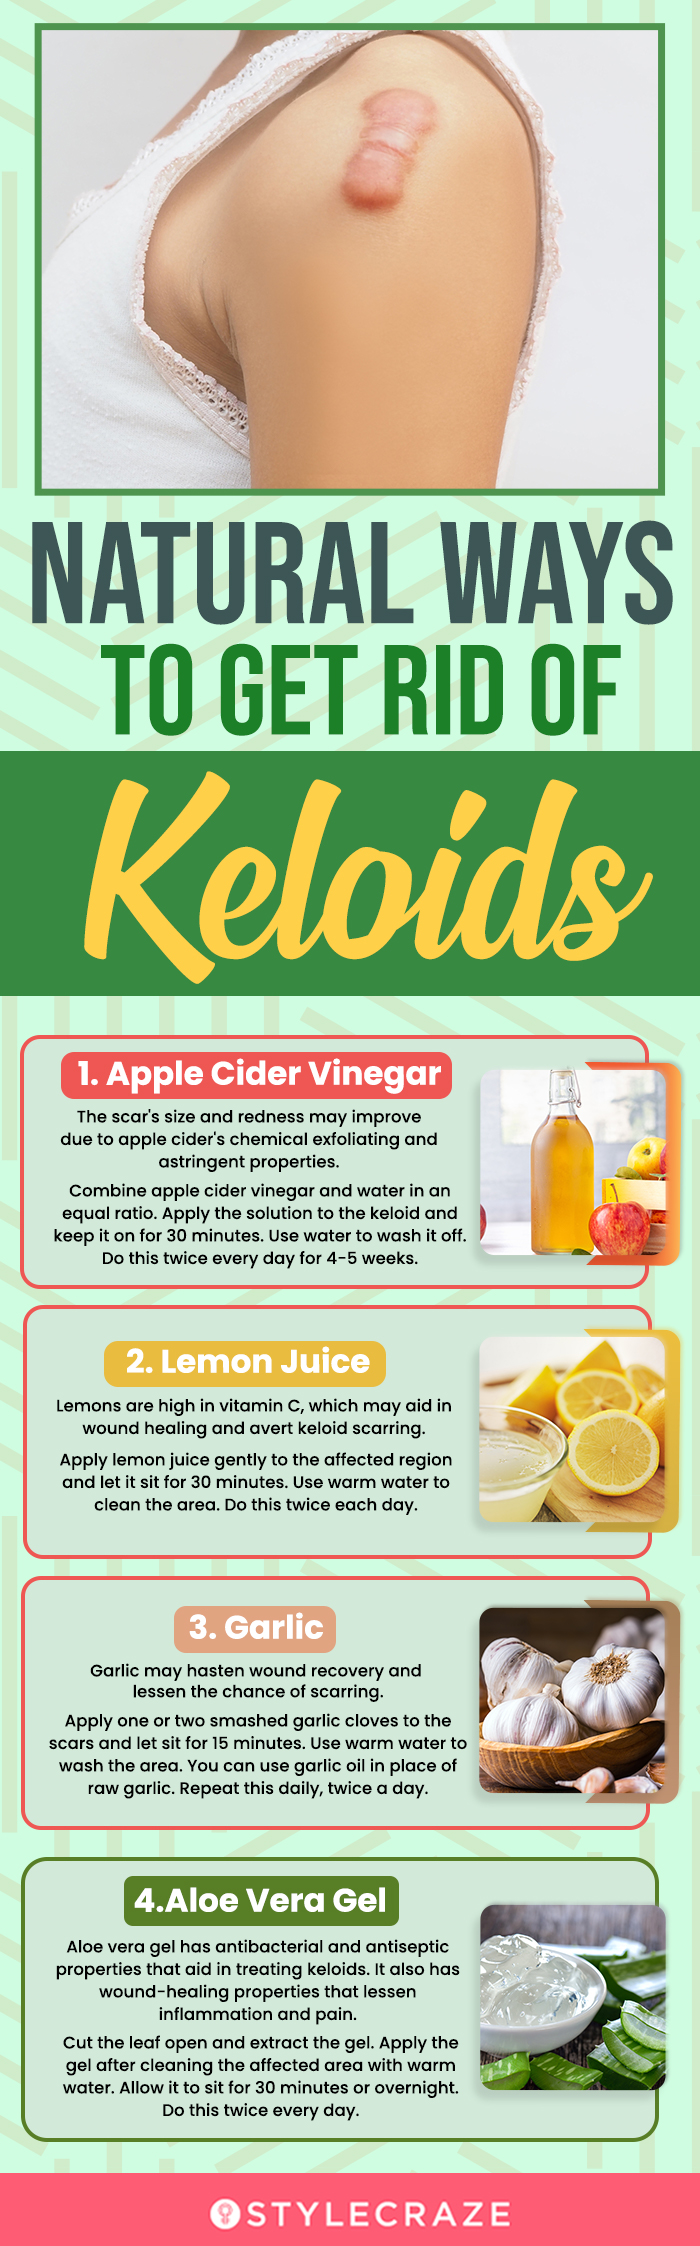 natural ways to get rid of keloids (infographic)